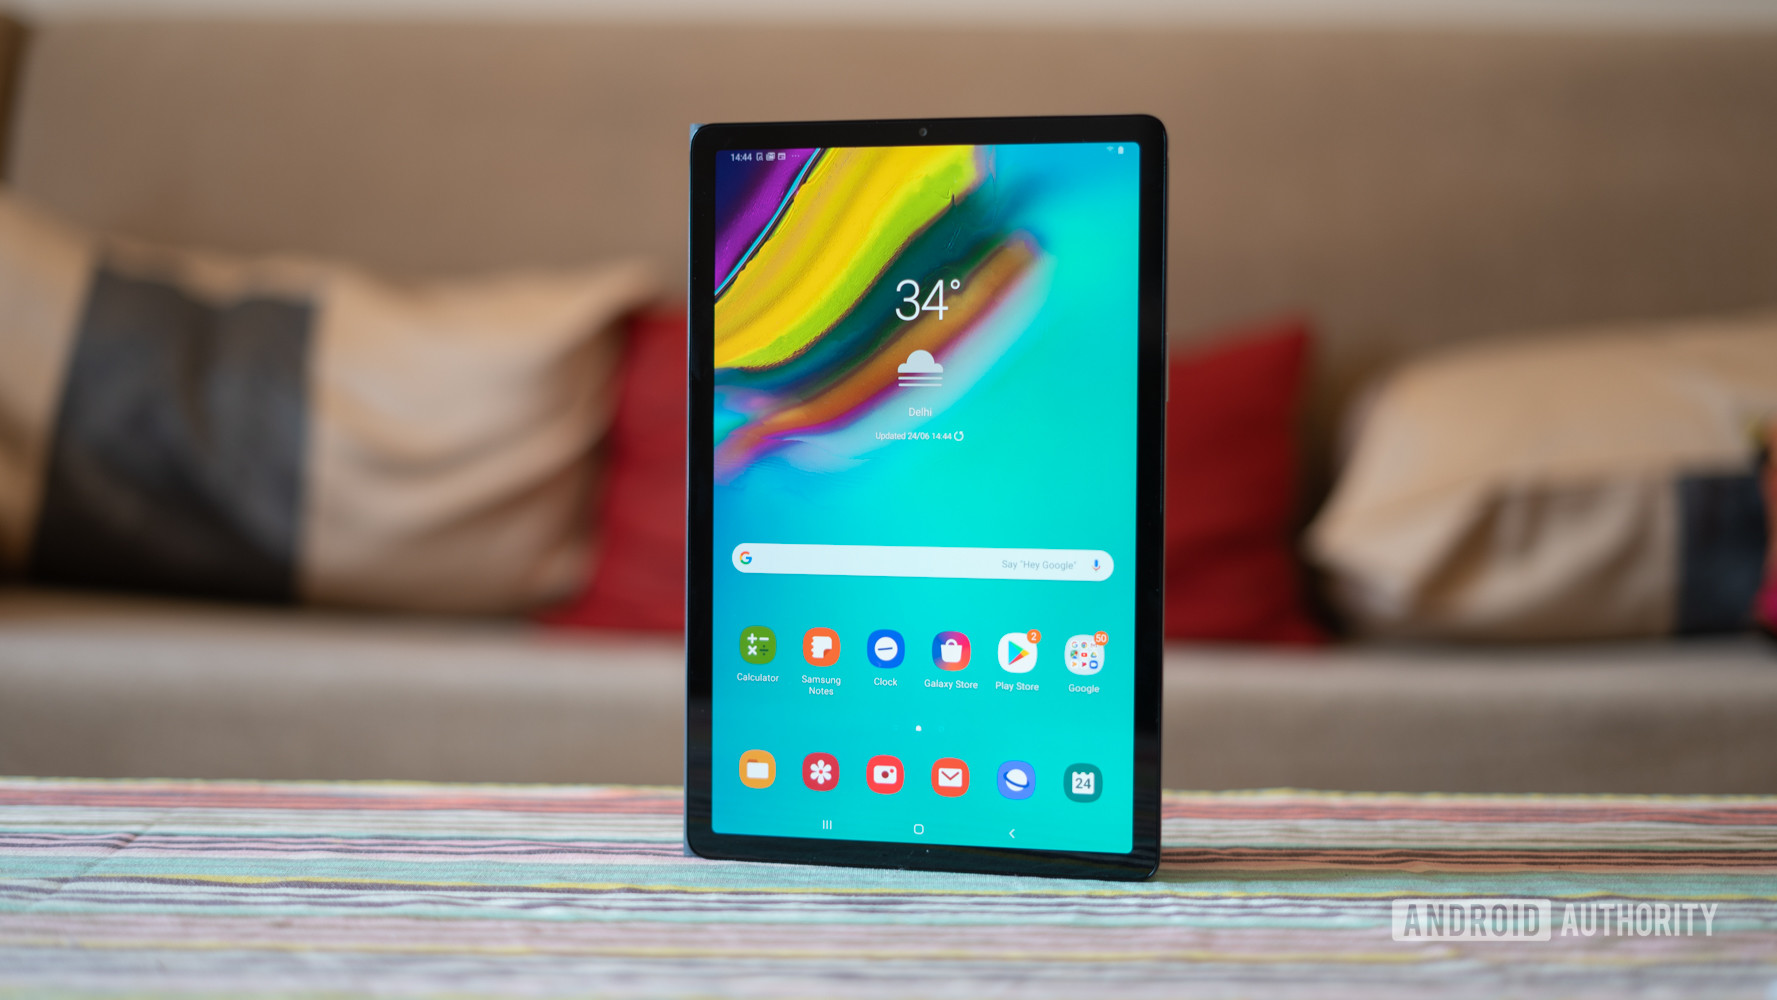 Galaxy Tab S5e showing display in portrait mode